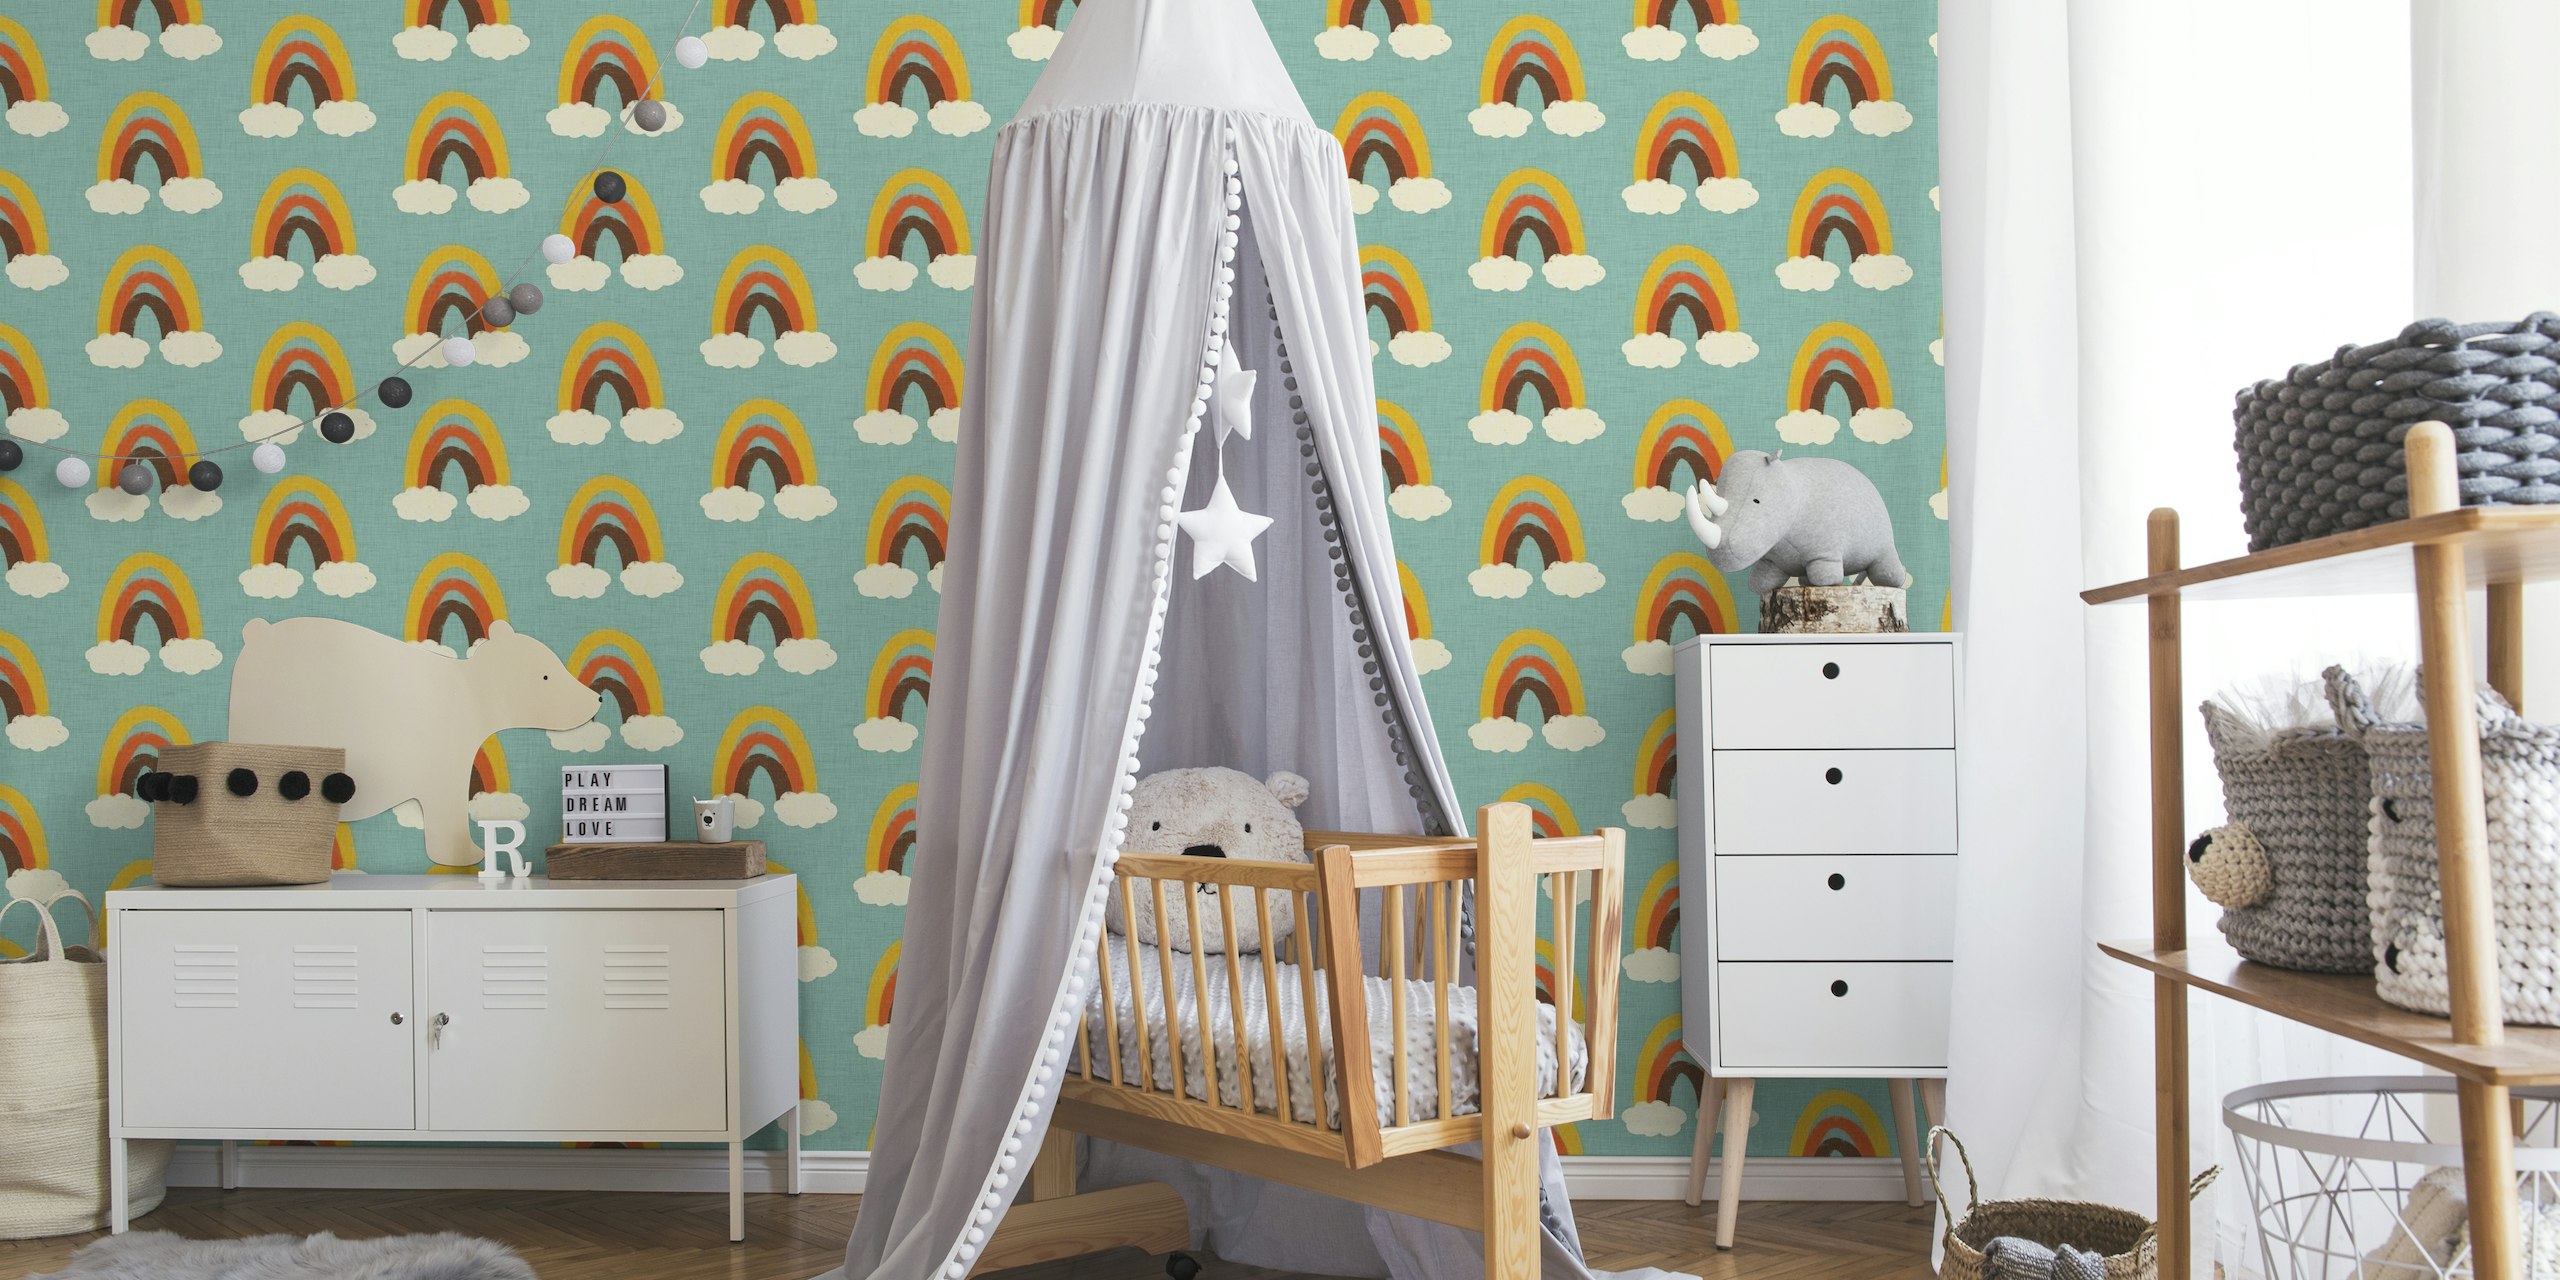 Groovy 70s Cute Rainbow with clouds Blue wallpaper